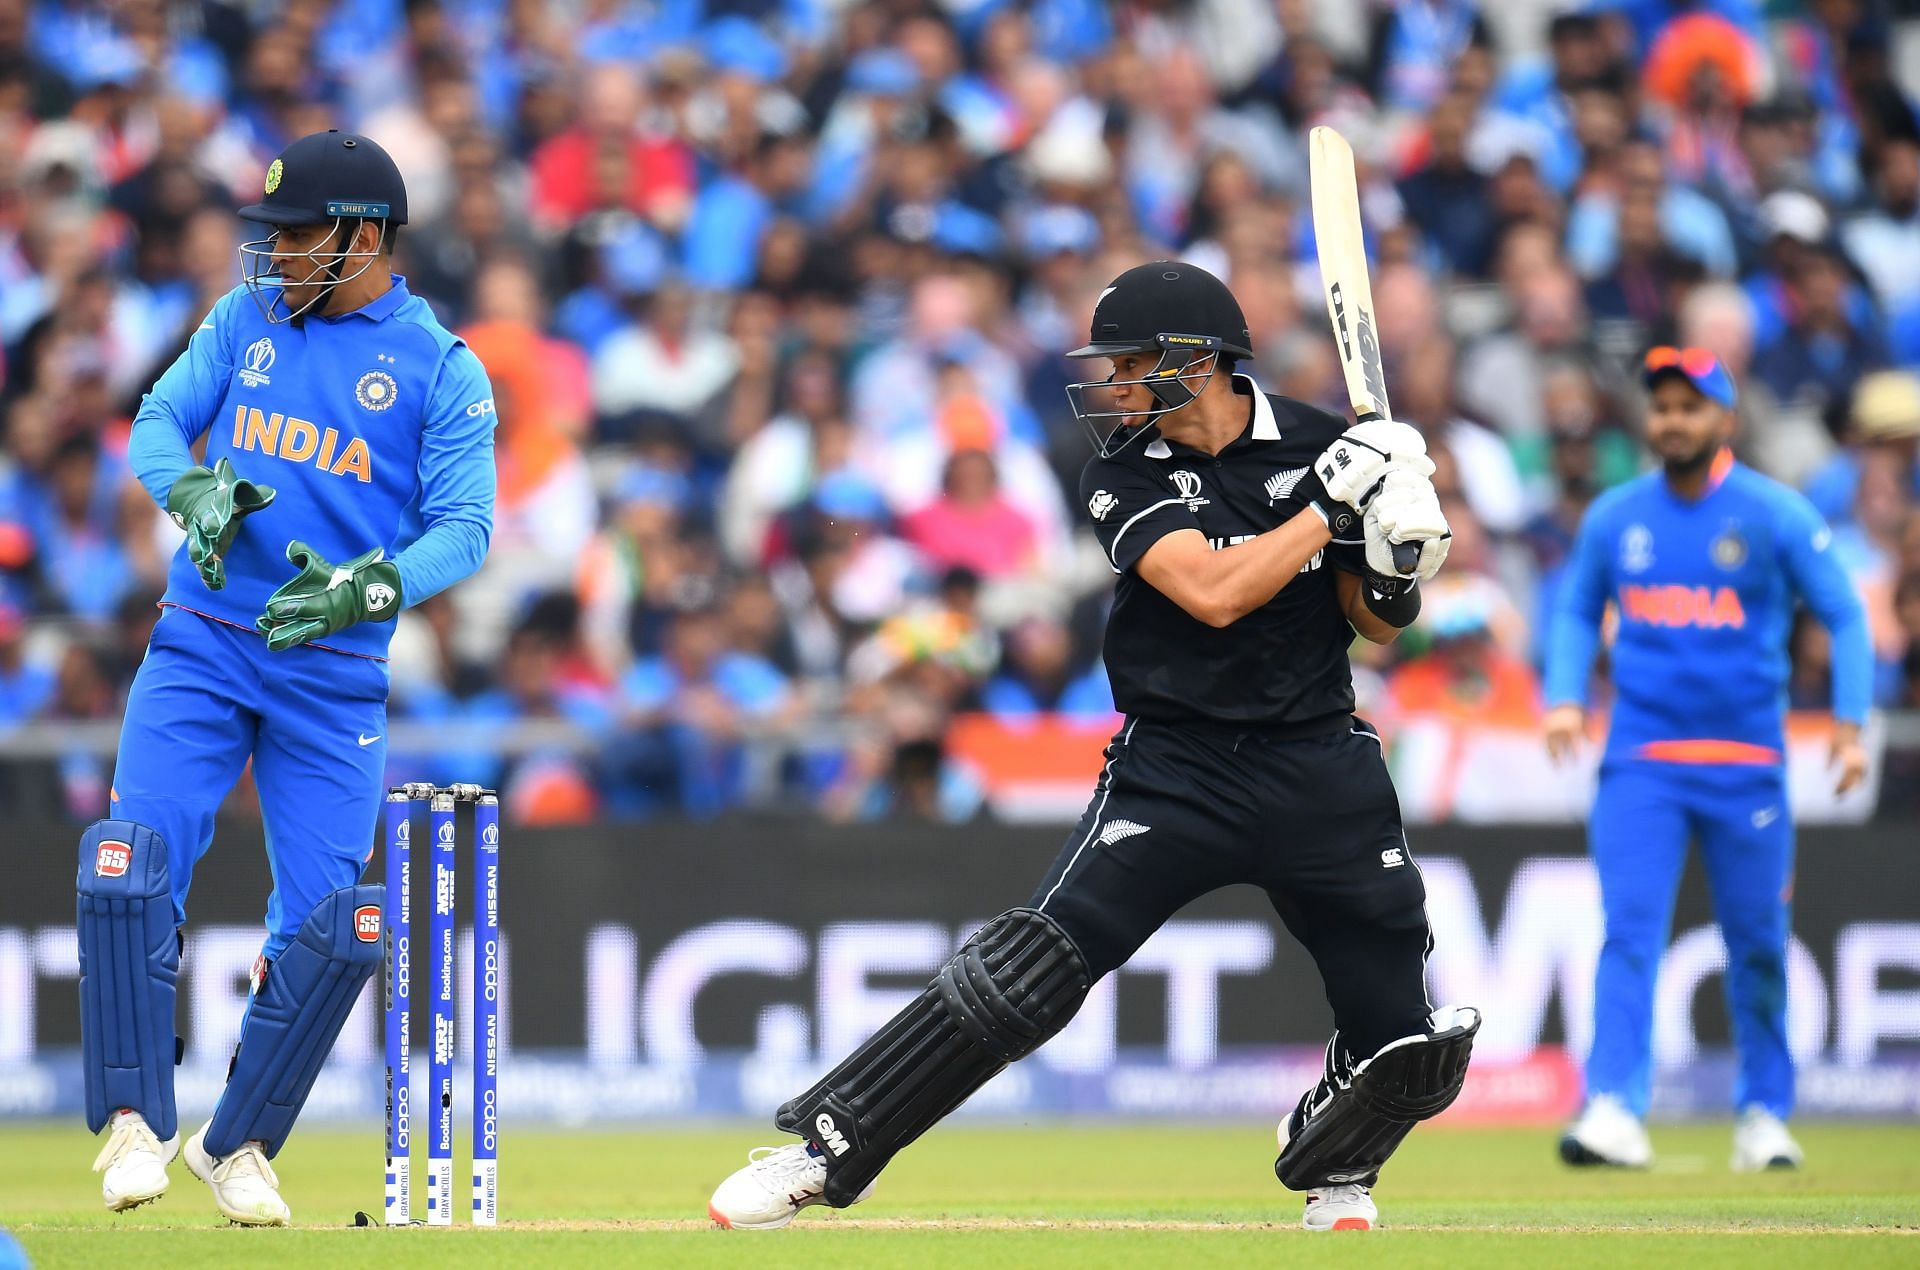 Ross Taylor played a key role in New Zealand reaching the final in 2019. (Pic: Getty Images)